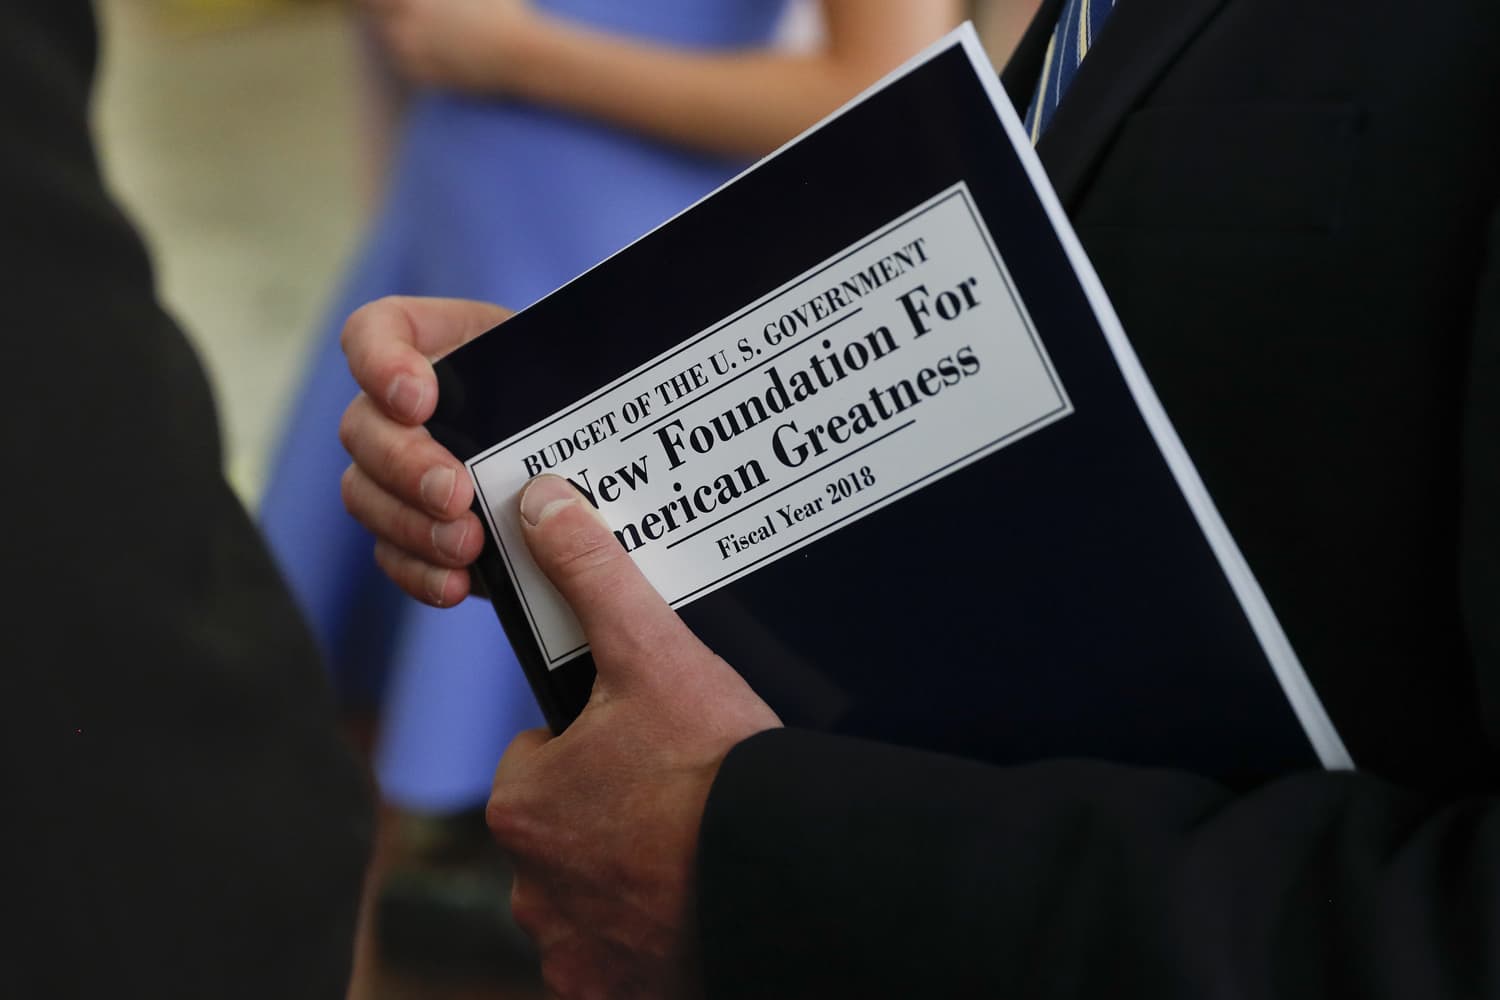 White House budget director Mick Mulvaney, holds a copy of "Budget of the U.S. Government A New Foundation For American Greatness Fiscal Year 2018" as he inspects the production run of President Donald Trump's fiscal 2018 federal budget, Friday, May 19, 2017, at the U.S. Government Publishing Office's (GPO) plant in Washington. (AP Photo/Carolyn Kaster)